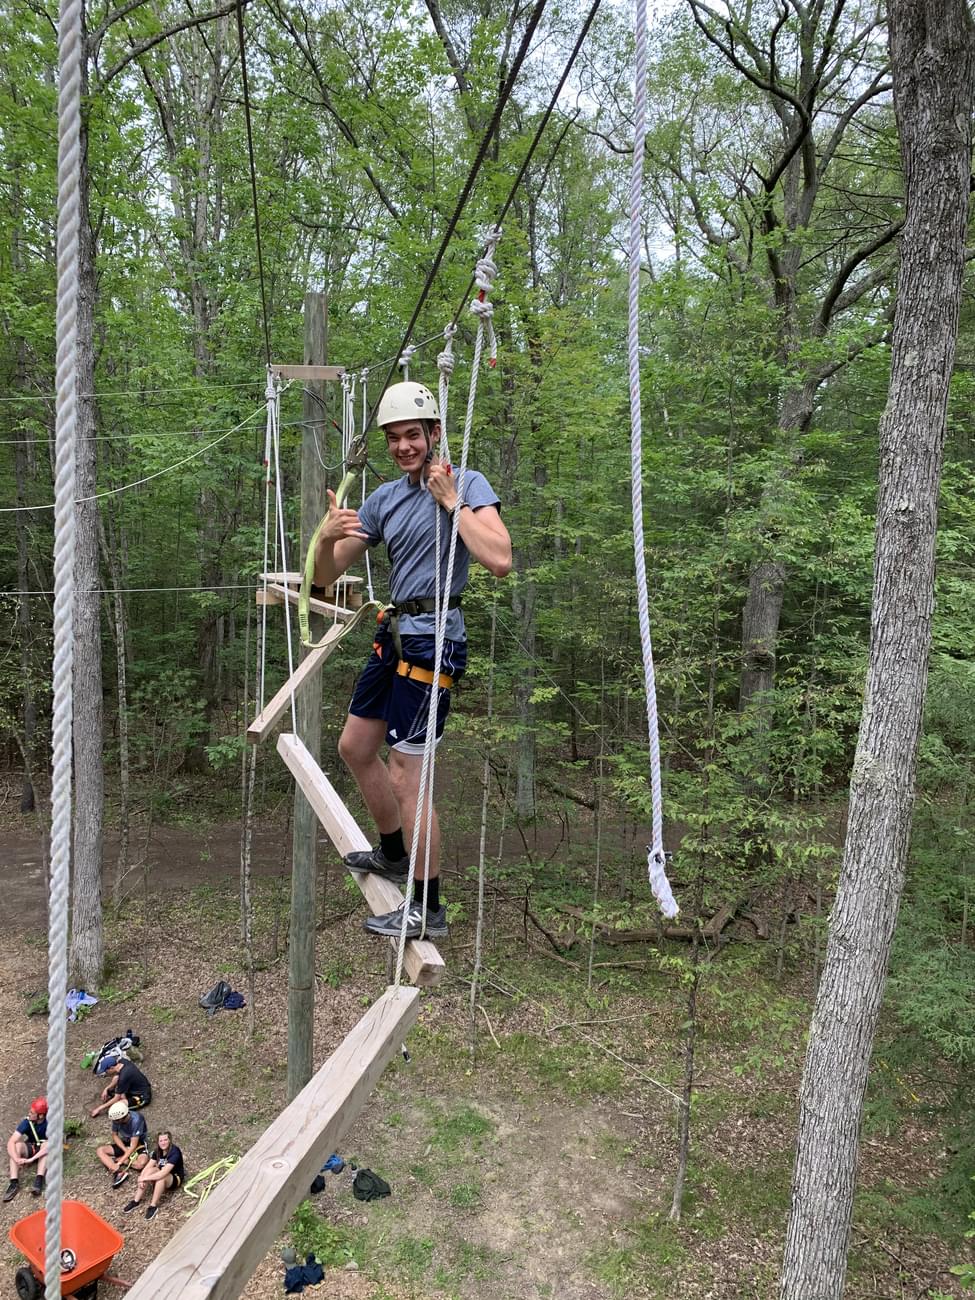 Houghton students standing on ropes course during Highlander Wilderness Adventure.